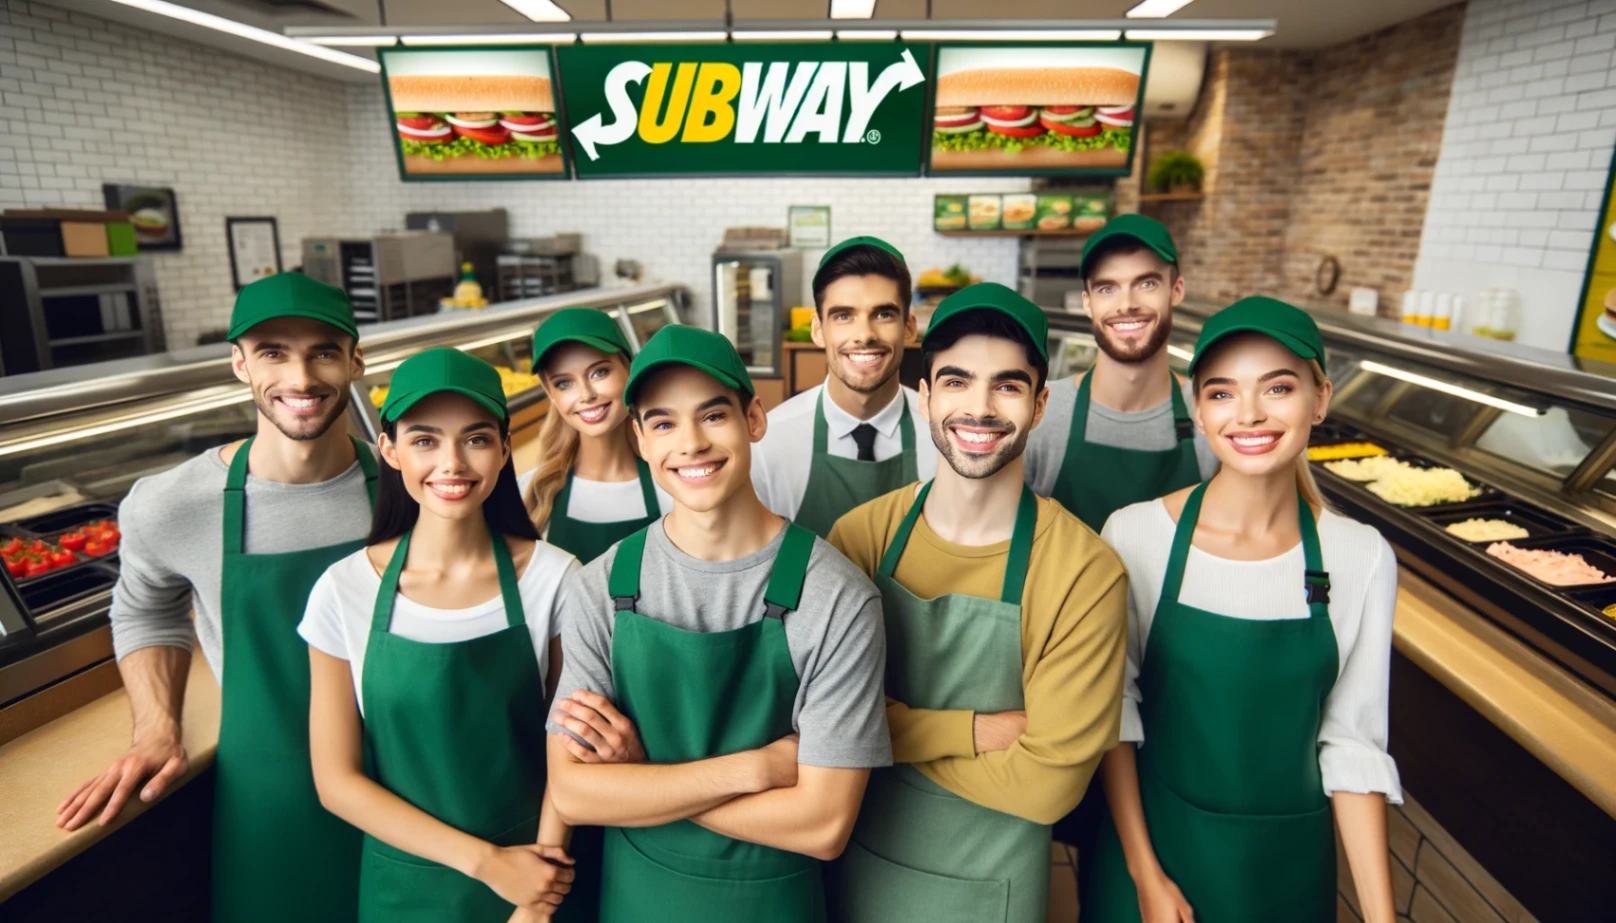 Subway Jobs: Step-by-Step to Apply for Vacancies